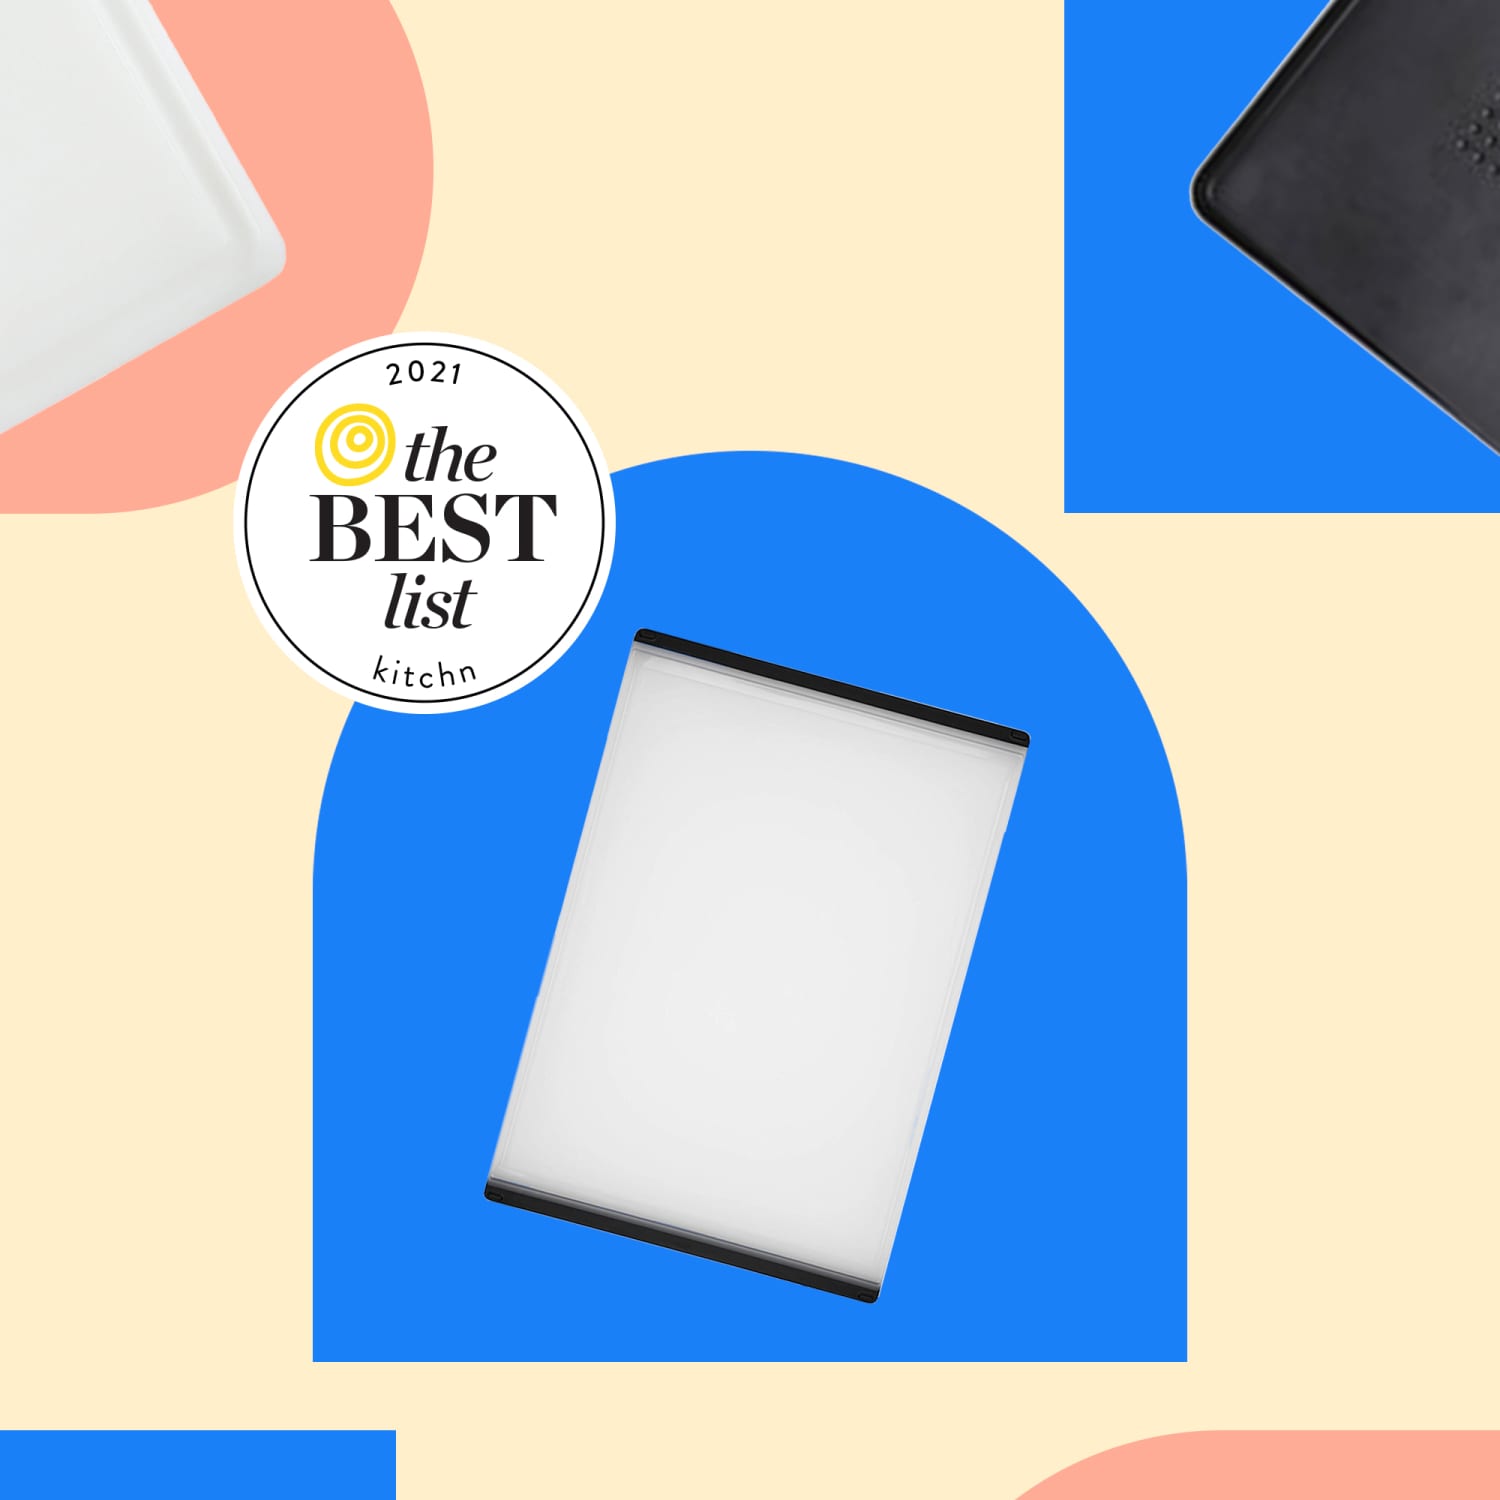 The Best Plastic Cutting Boards to Buy in 2021 - Tested, Reviewed